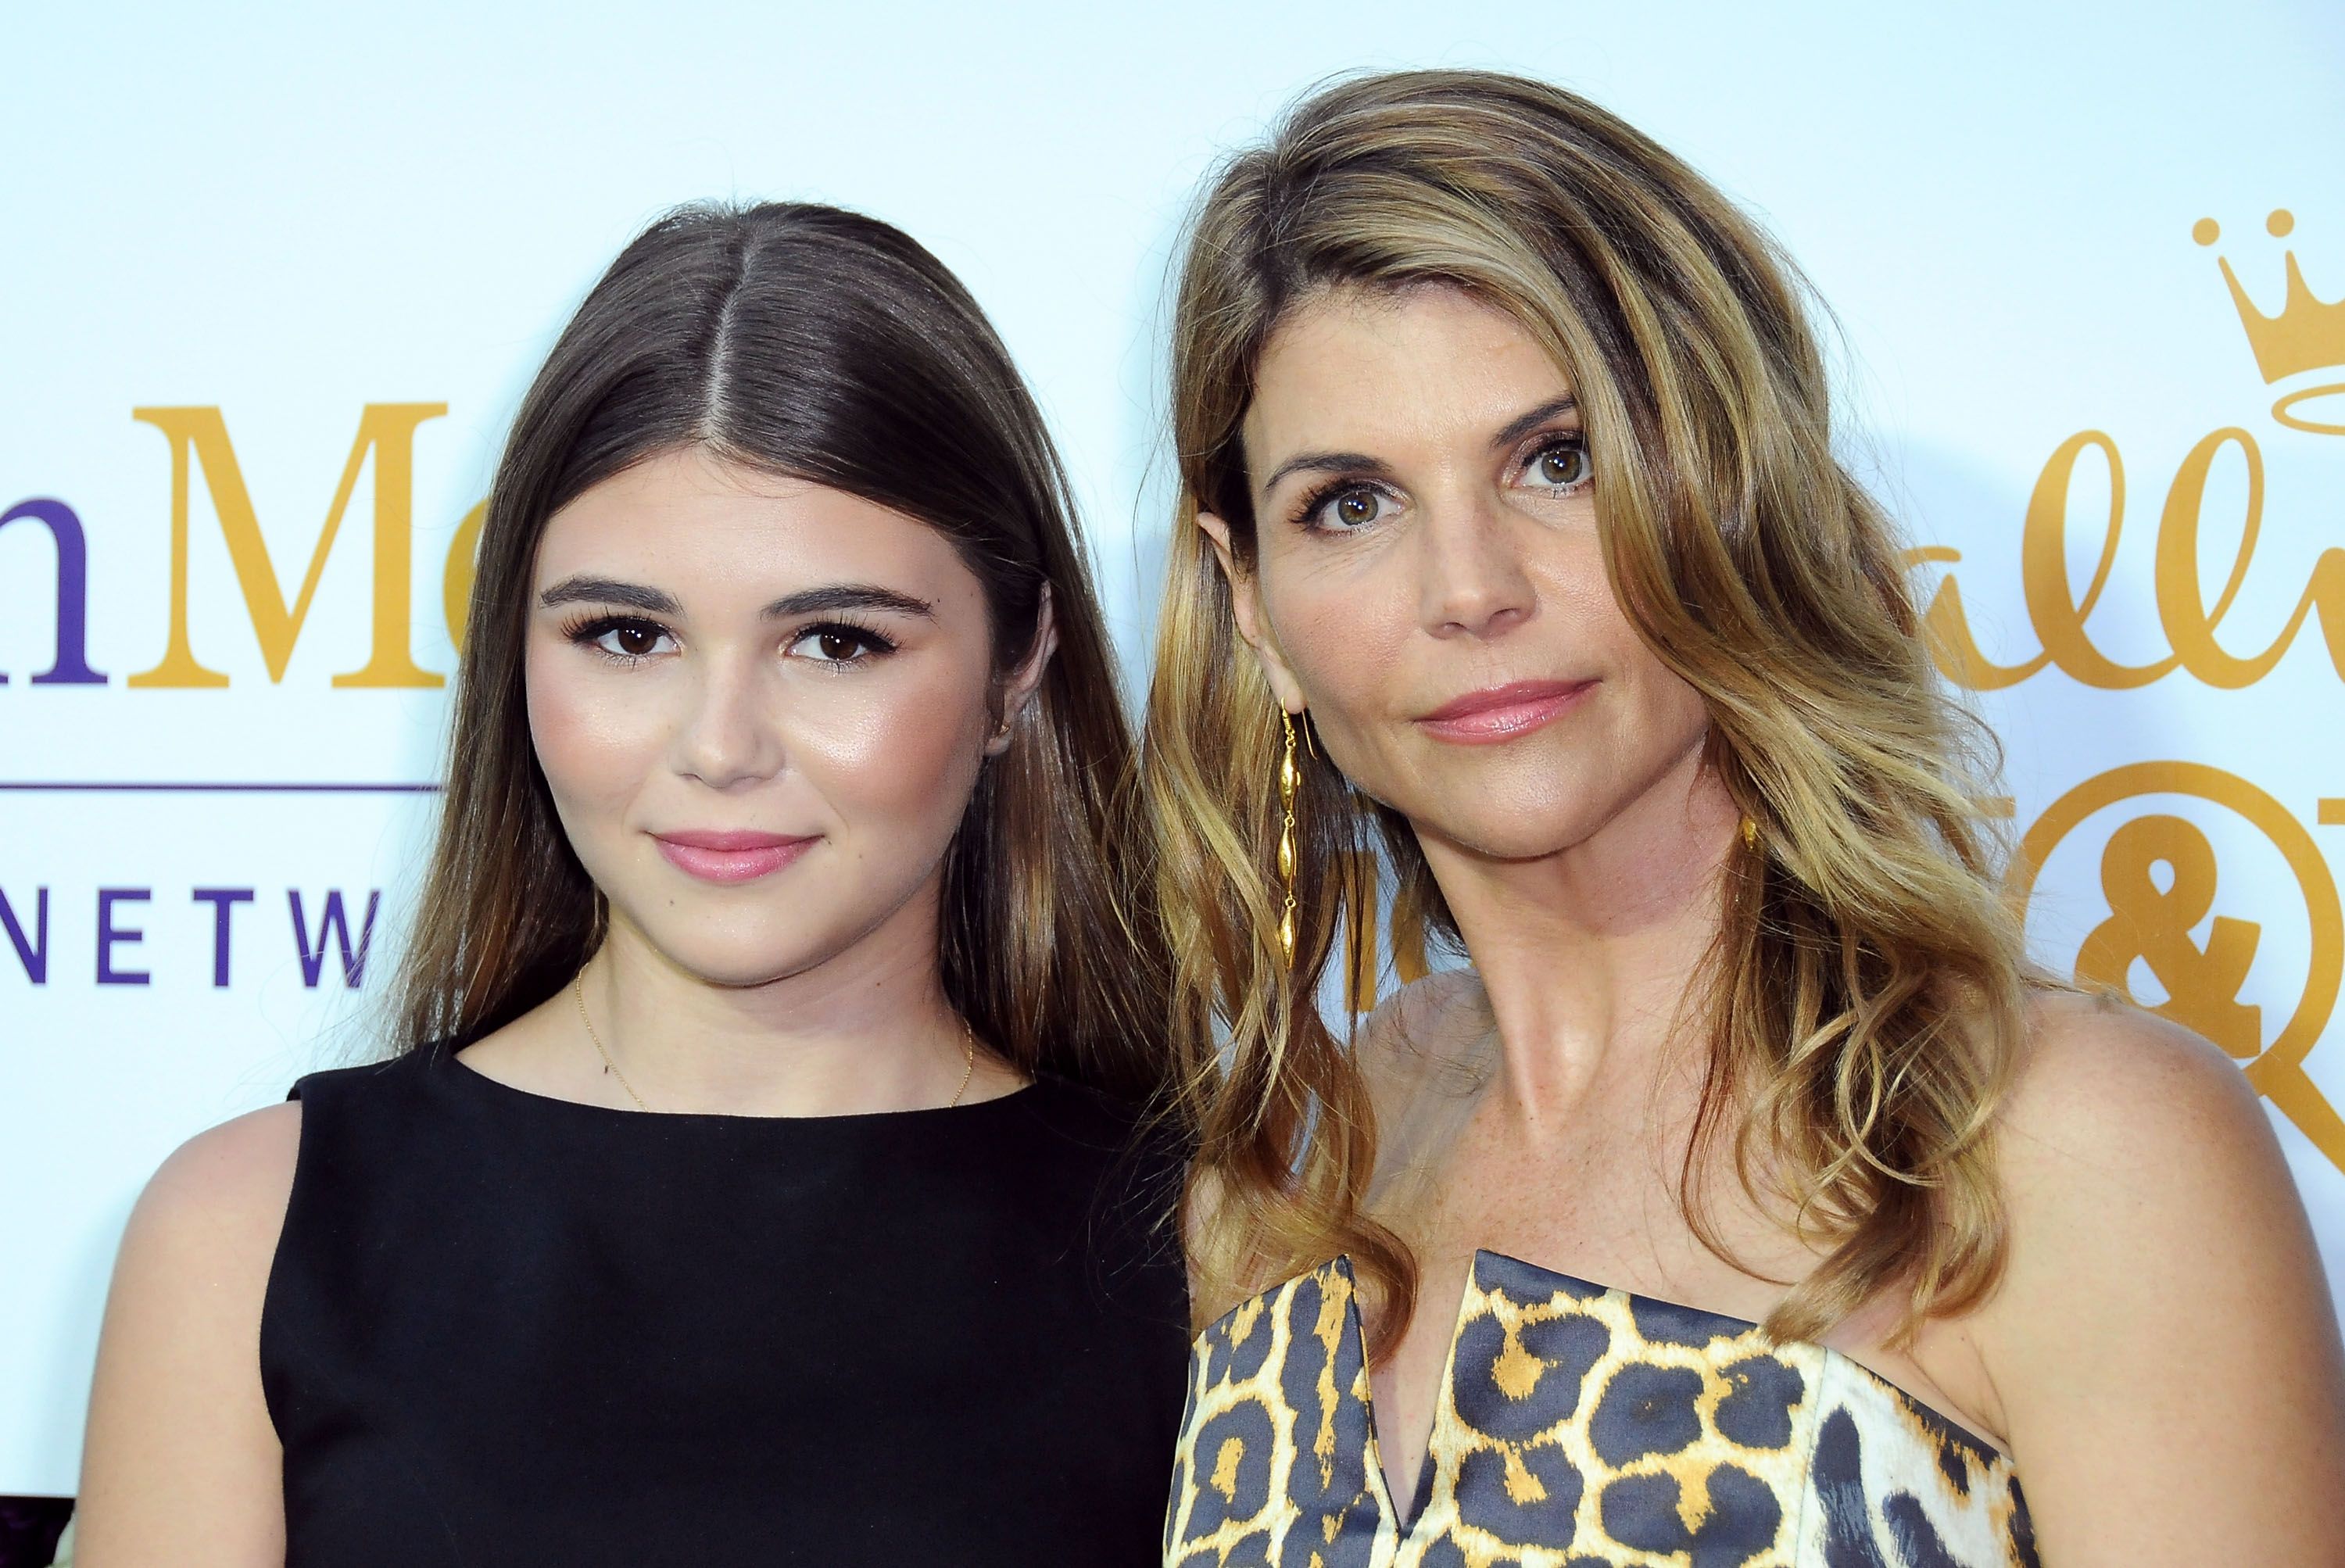 Actress Lori Loughlin and daughter Olivia Jade Giannulli at the 2015 Summer TCA Tour - Hallmark Channel and Hallmark Movies And Mysteries on July 29, 2015 | Photo: Getty Images